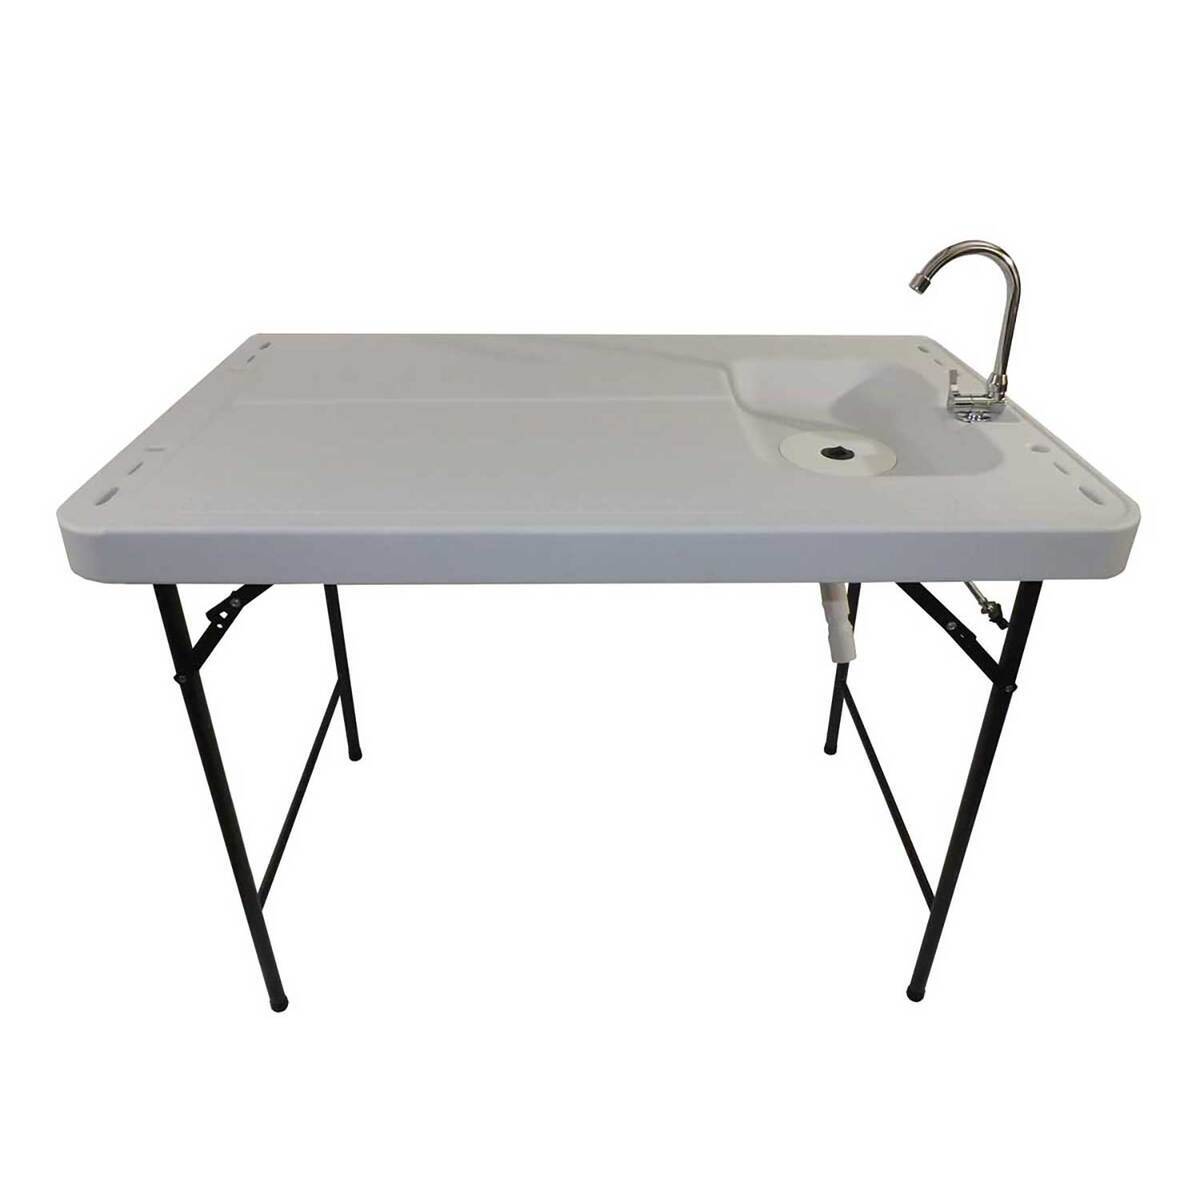 Old Cedar Outfitters Premium Oversized Game Cleaning Station